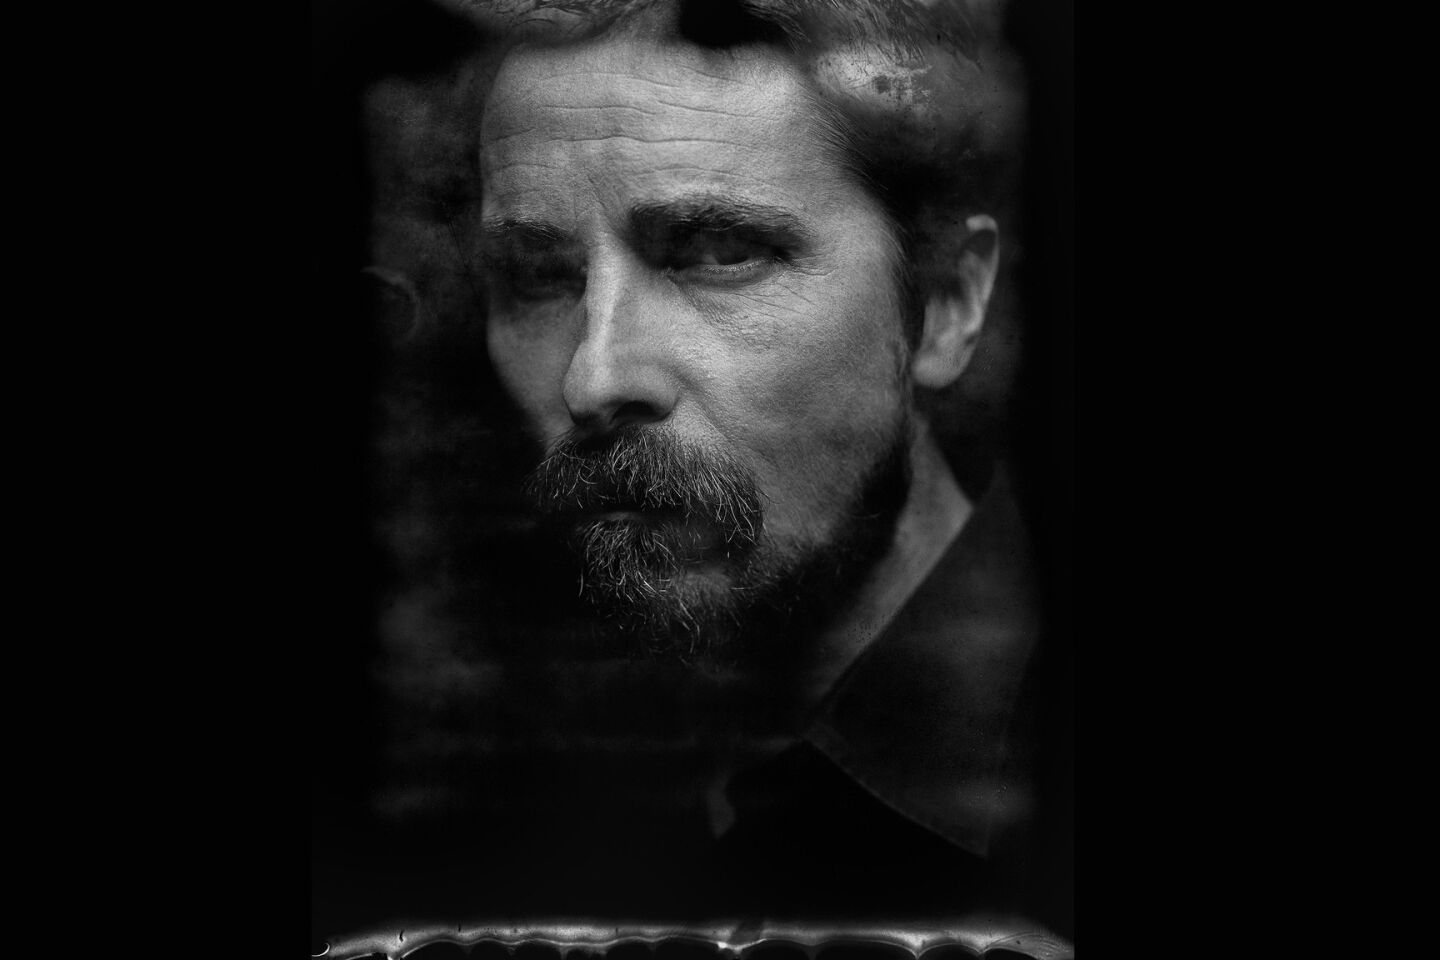 Celebrity portraits by The Times | Christian Bale